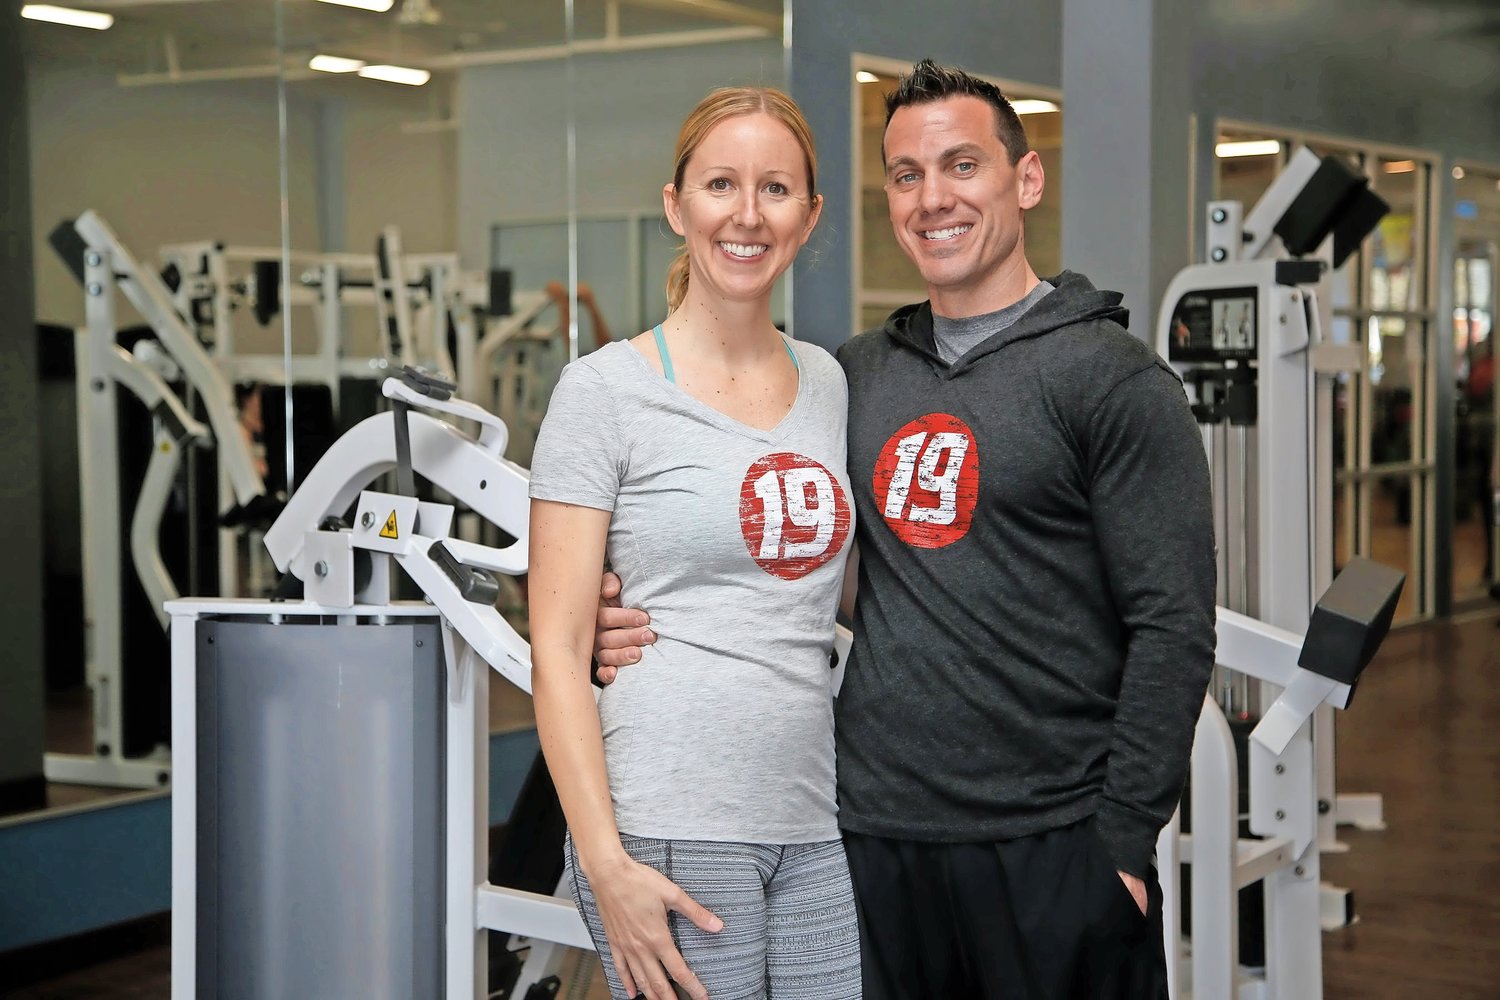 Fitness 19 owners Michael and Kelly Hobbs look forward to maintaining its programs.